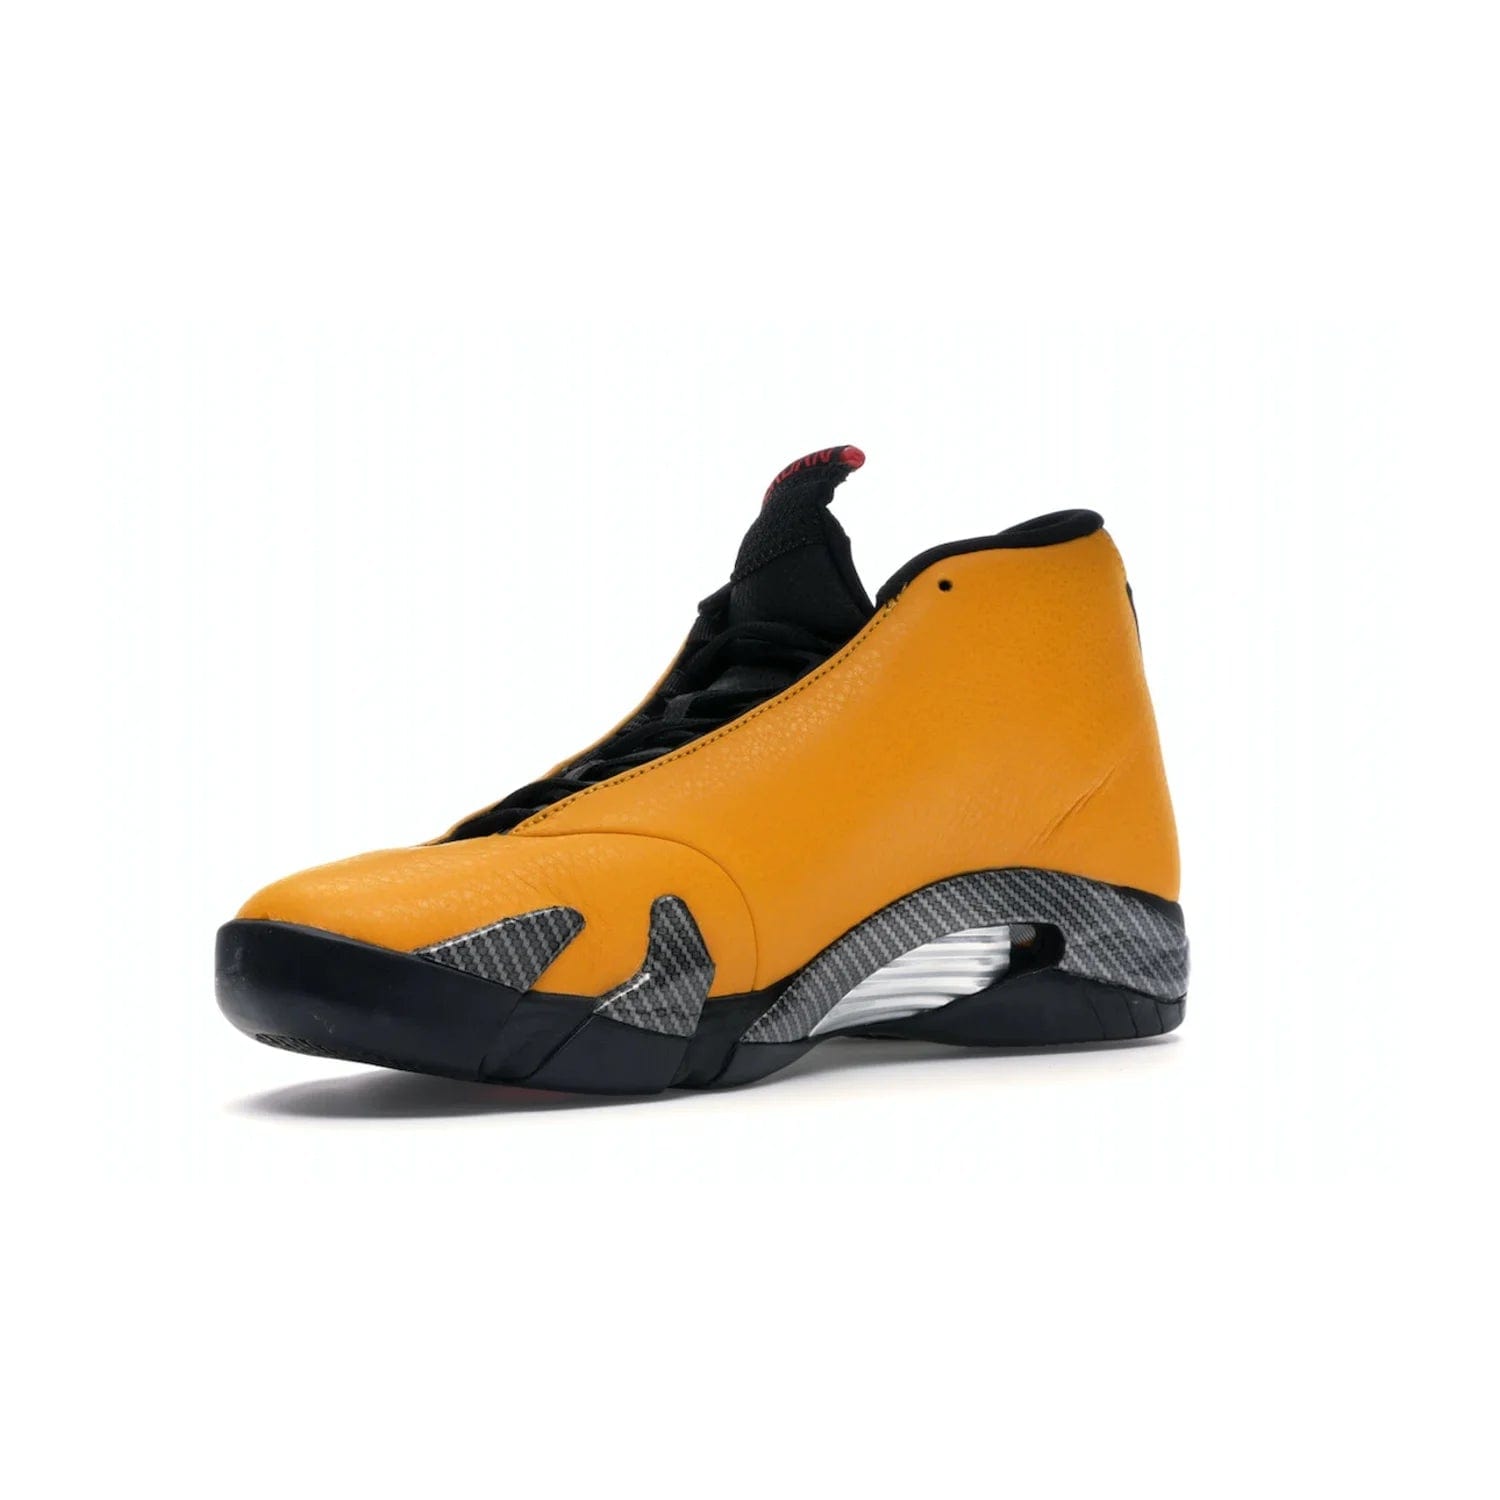 Jordan 14 Retro University Gold - Image 15 - Only at www.BallersClubKickz.com - Air Jordan 14 Retro University Gold: High-quality leather sneaker with Jumpman, tongue & heel logos. Zoom Air units & herringbone traction for superior comfort. University Gold outsole for stylish streetwear.